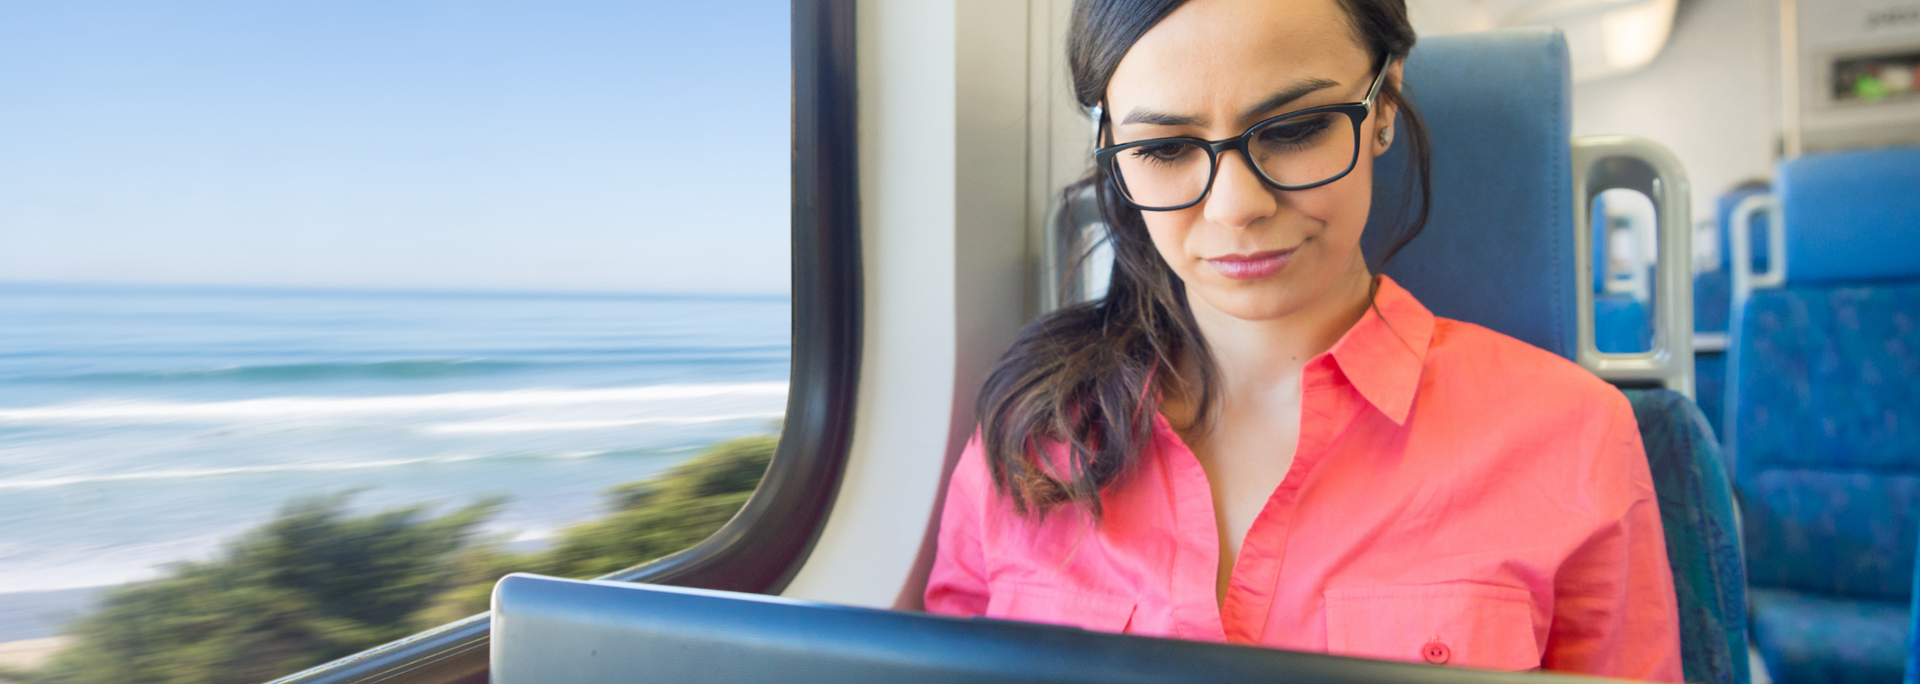 Picture of a professional using a laptop on a train.